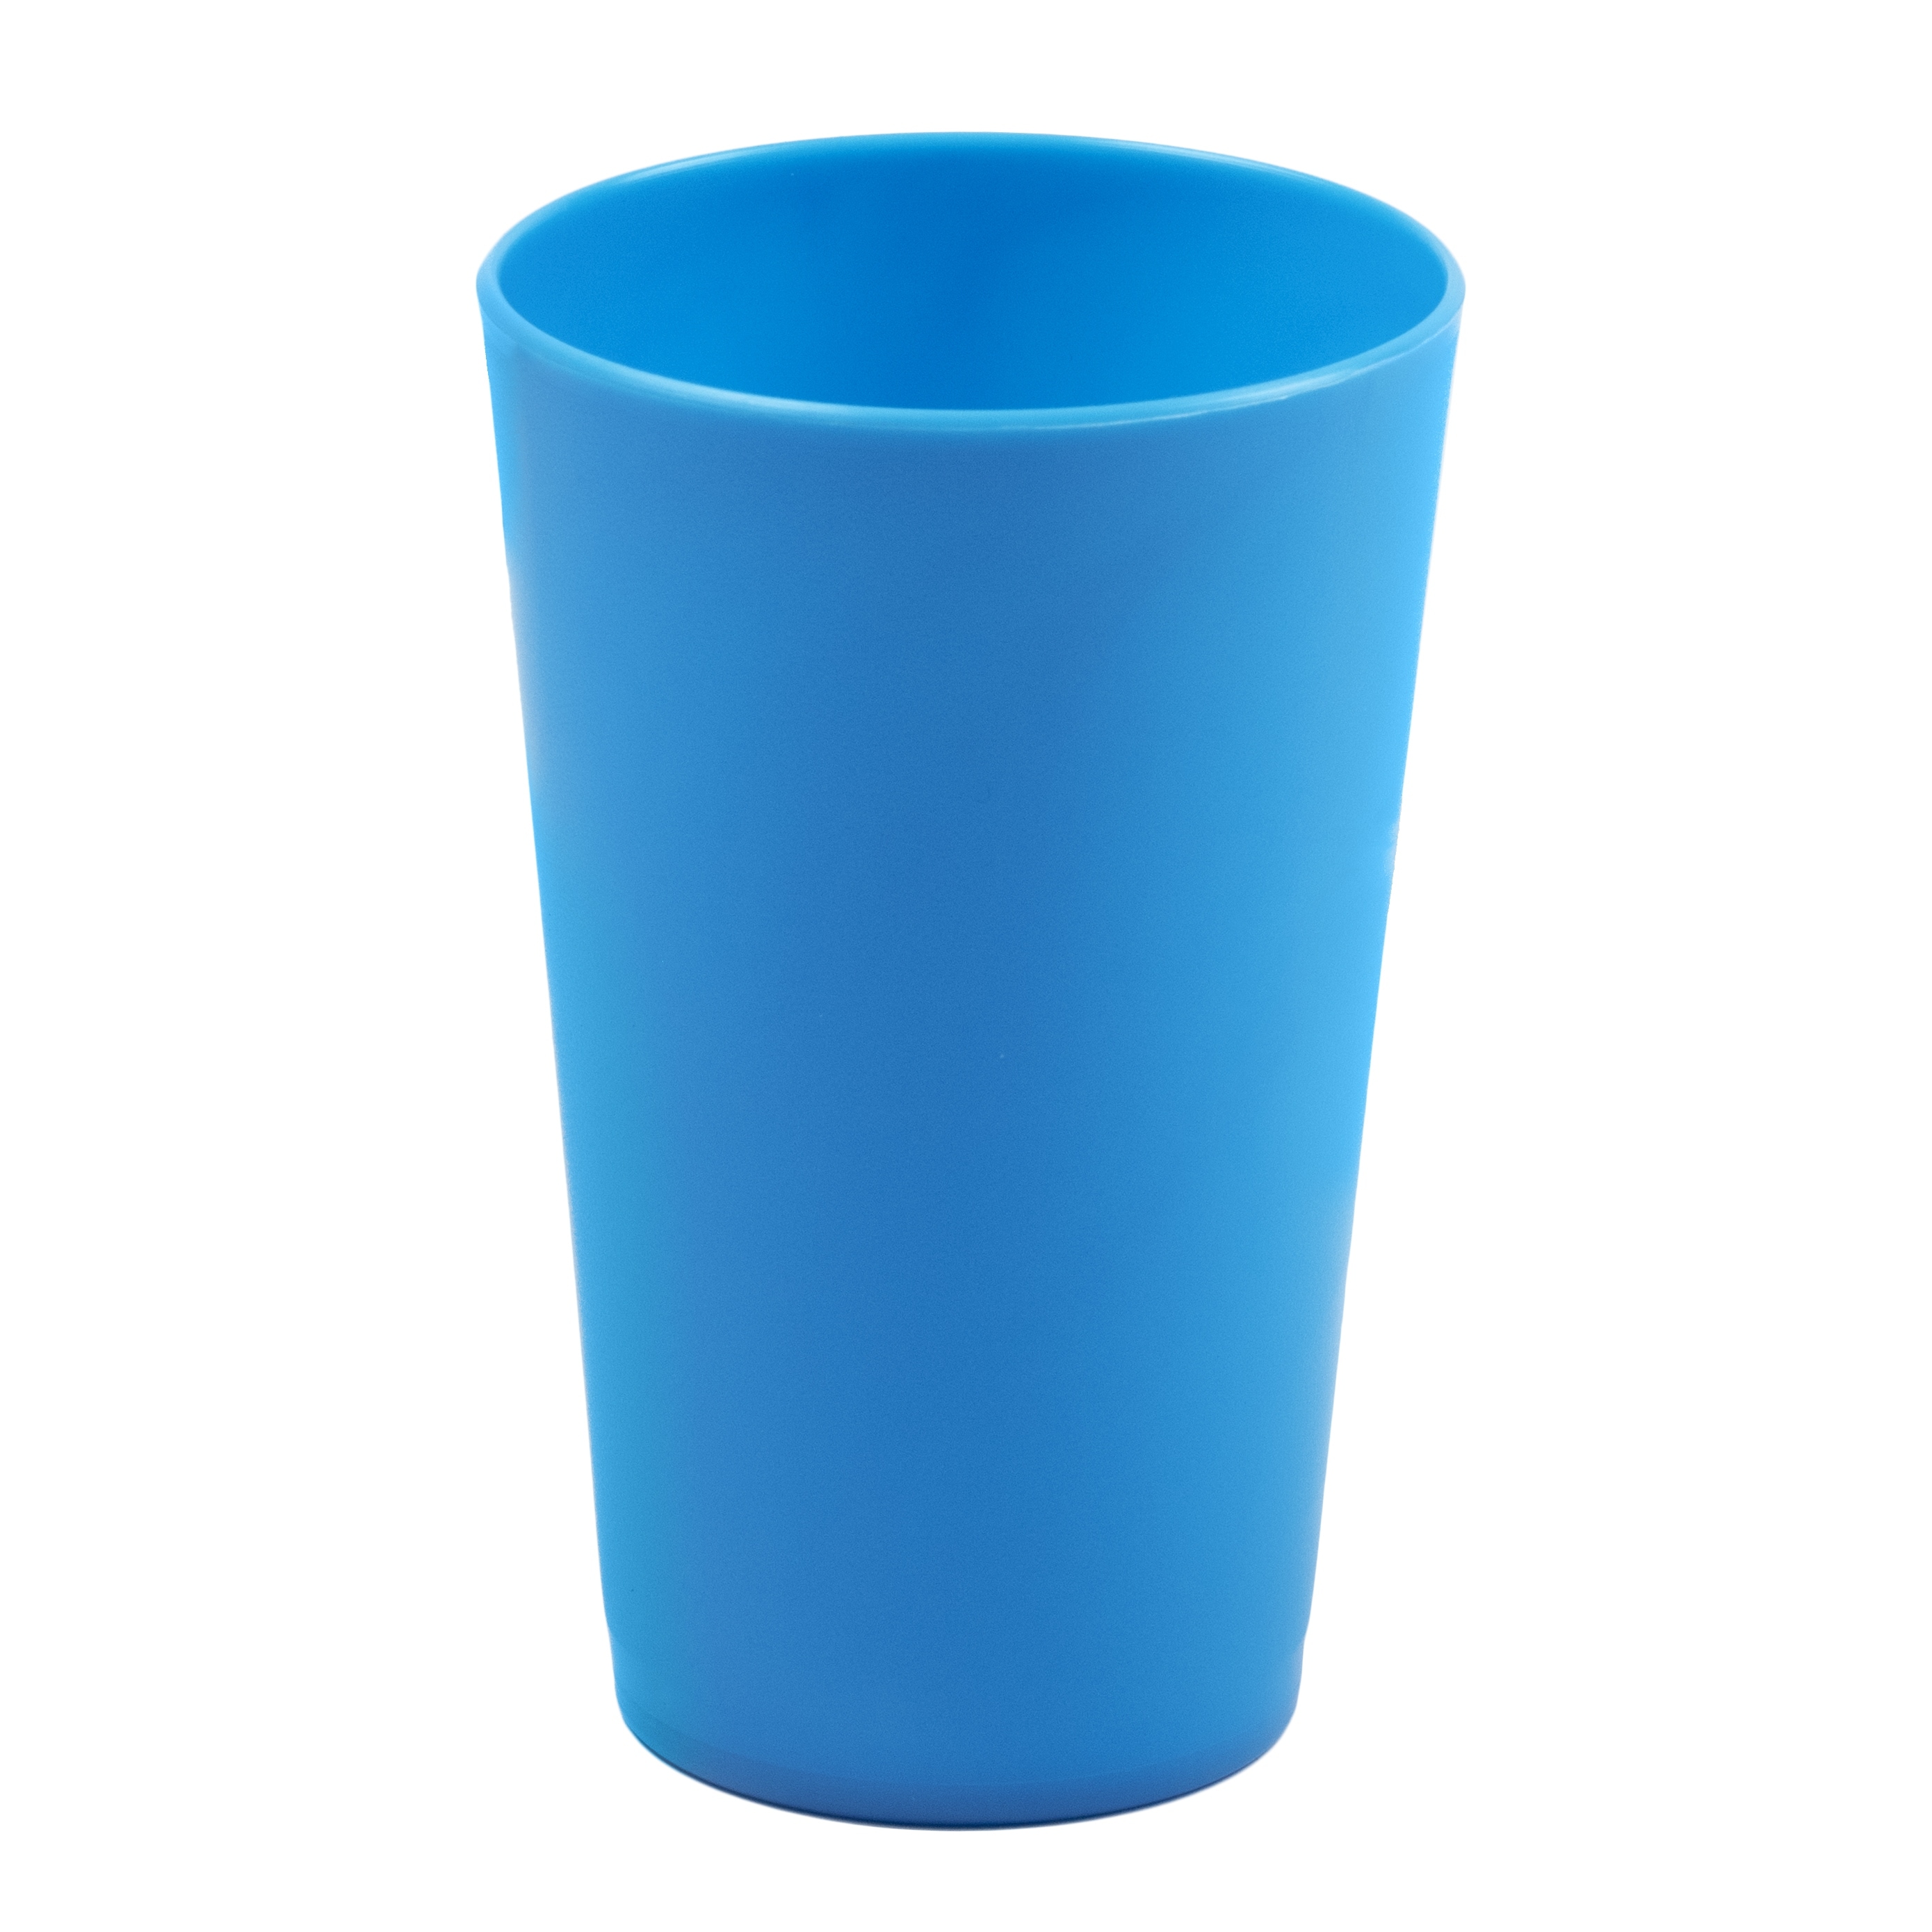 Plastic 10.5 Replacement Reusable Plastic Straw for Tumblers, Blue